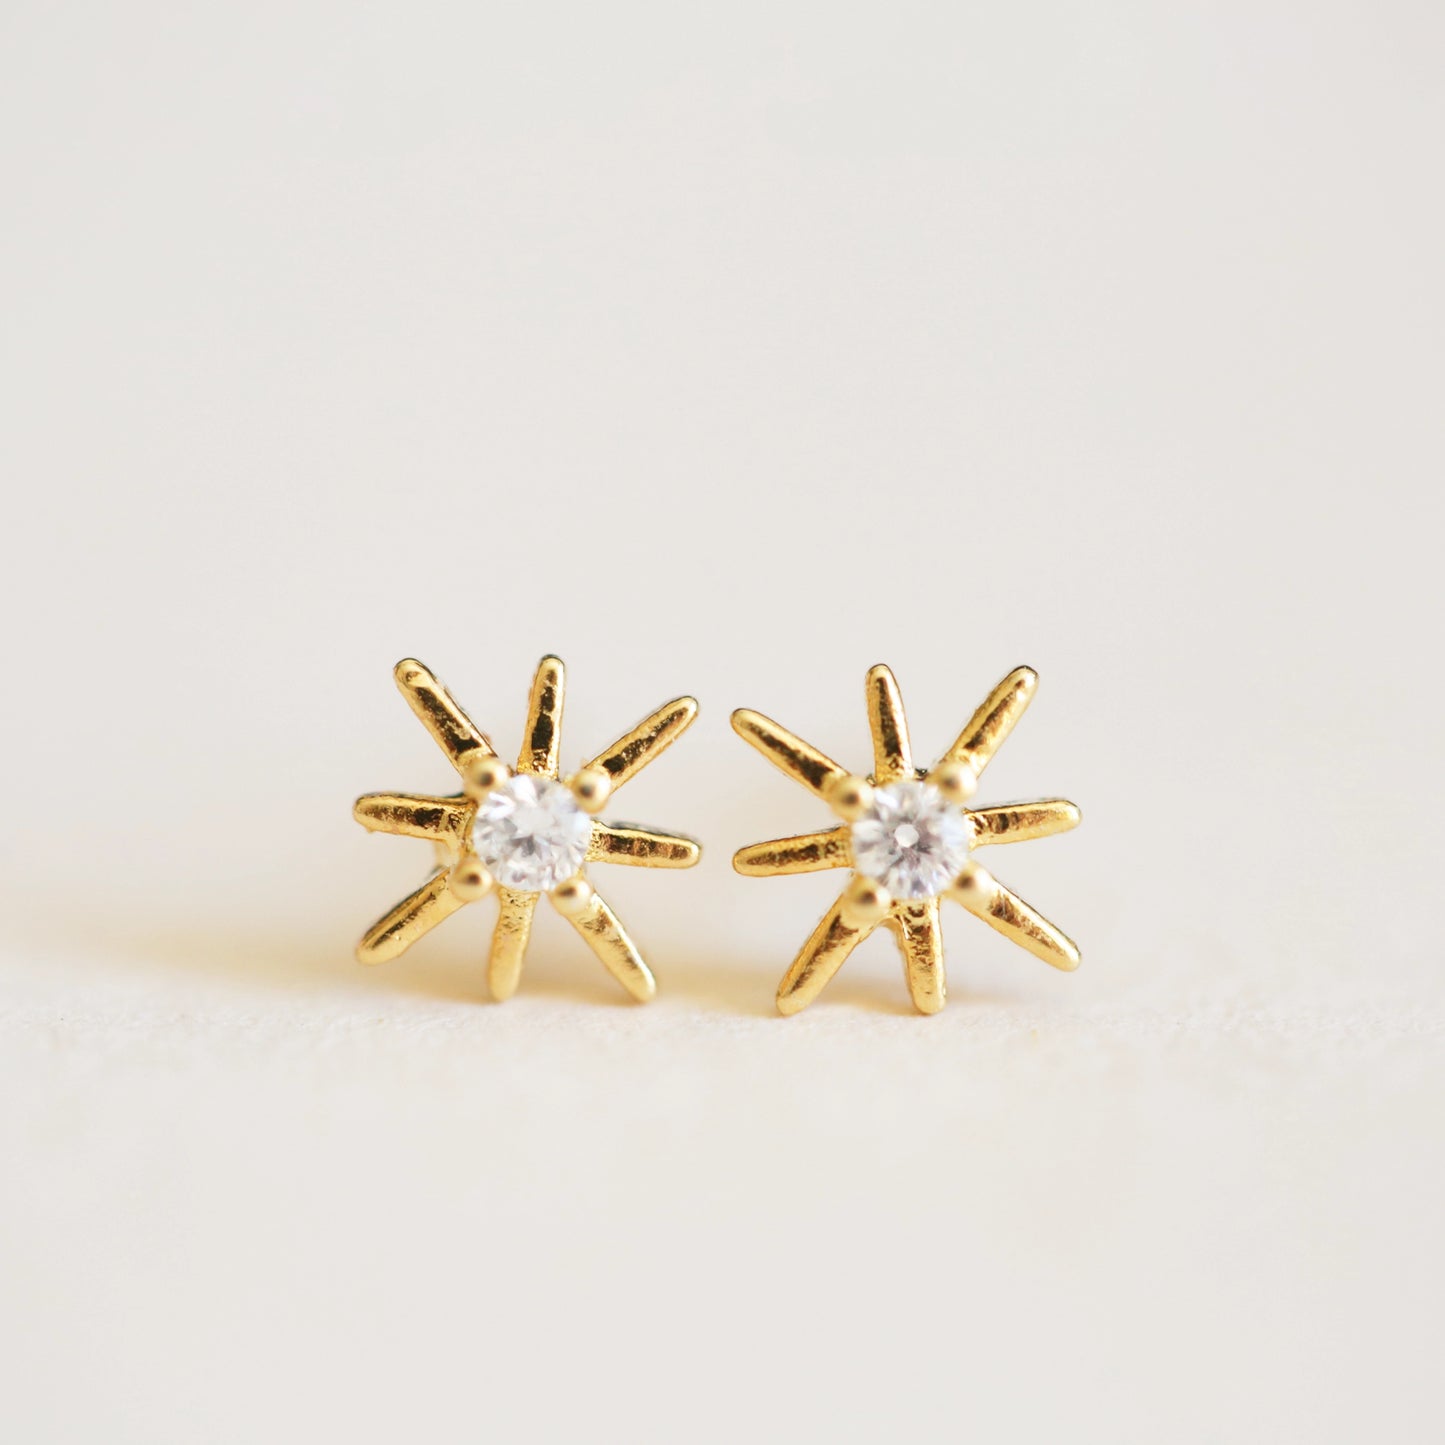 On an ivory background is a pair of dainty gold star earrings with a CZ stone in the center. 